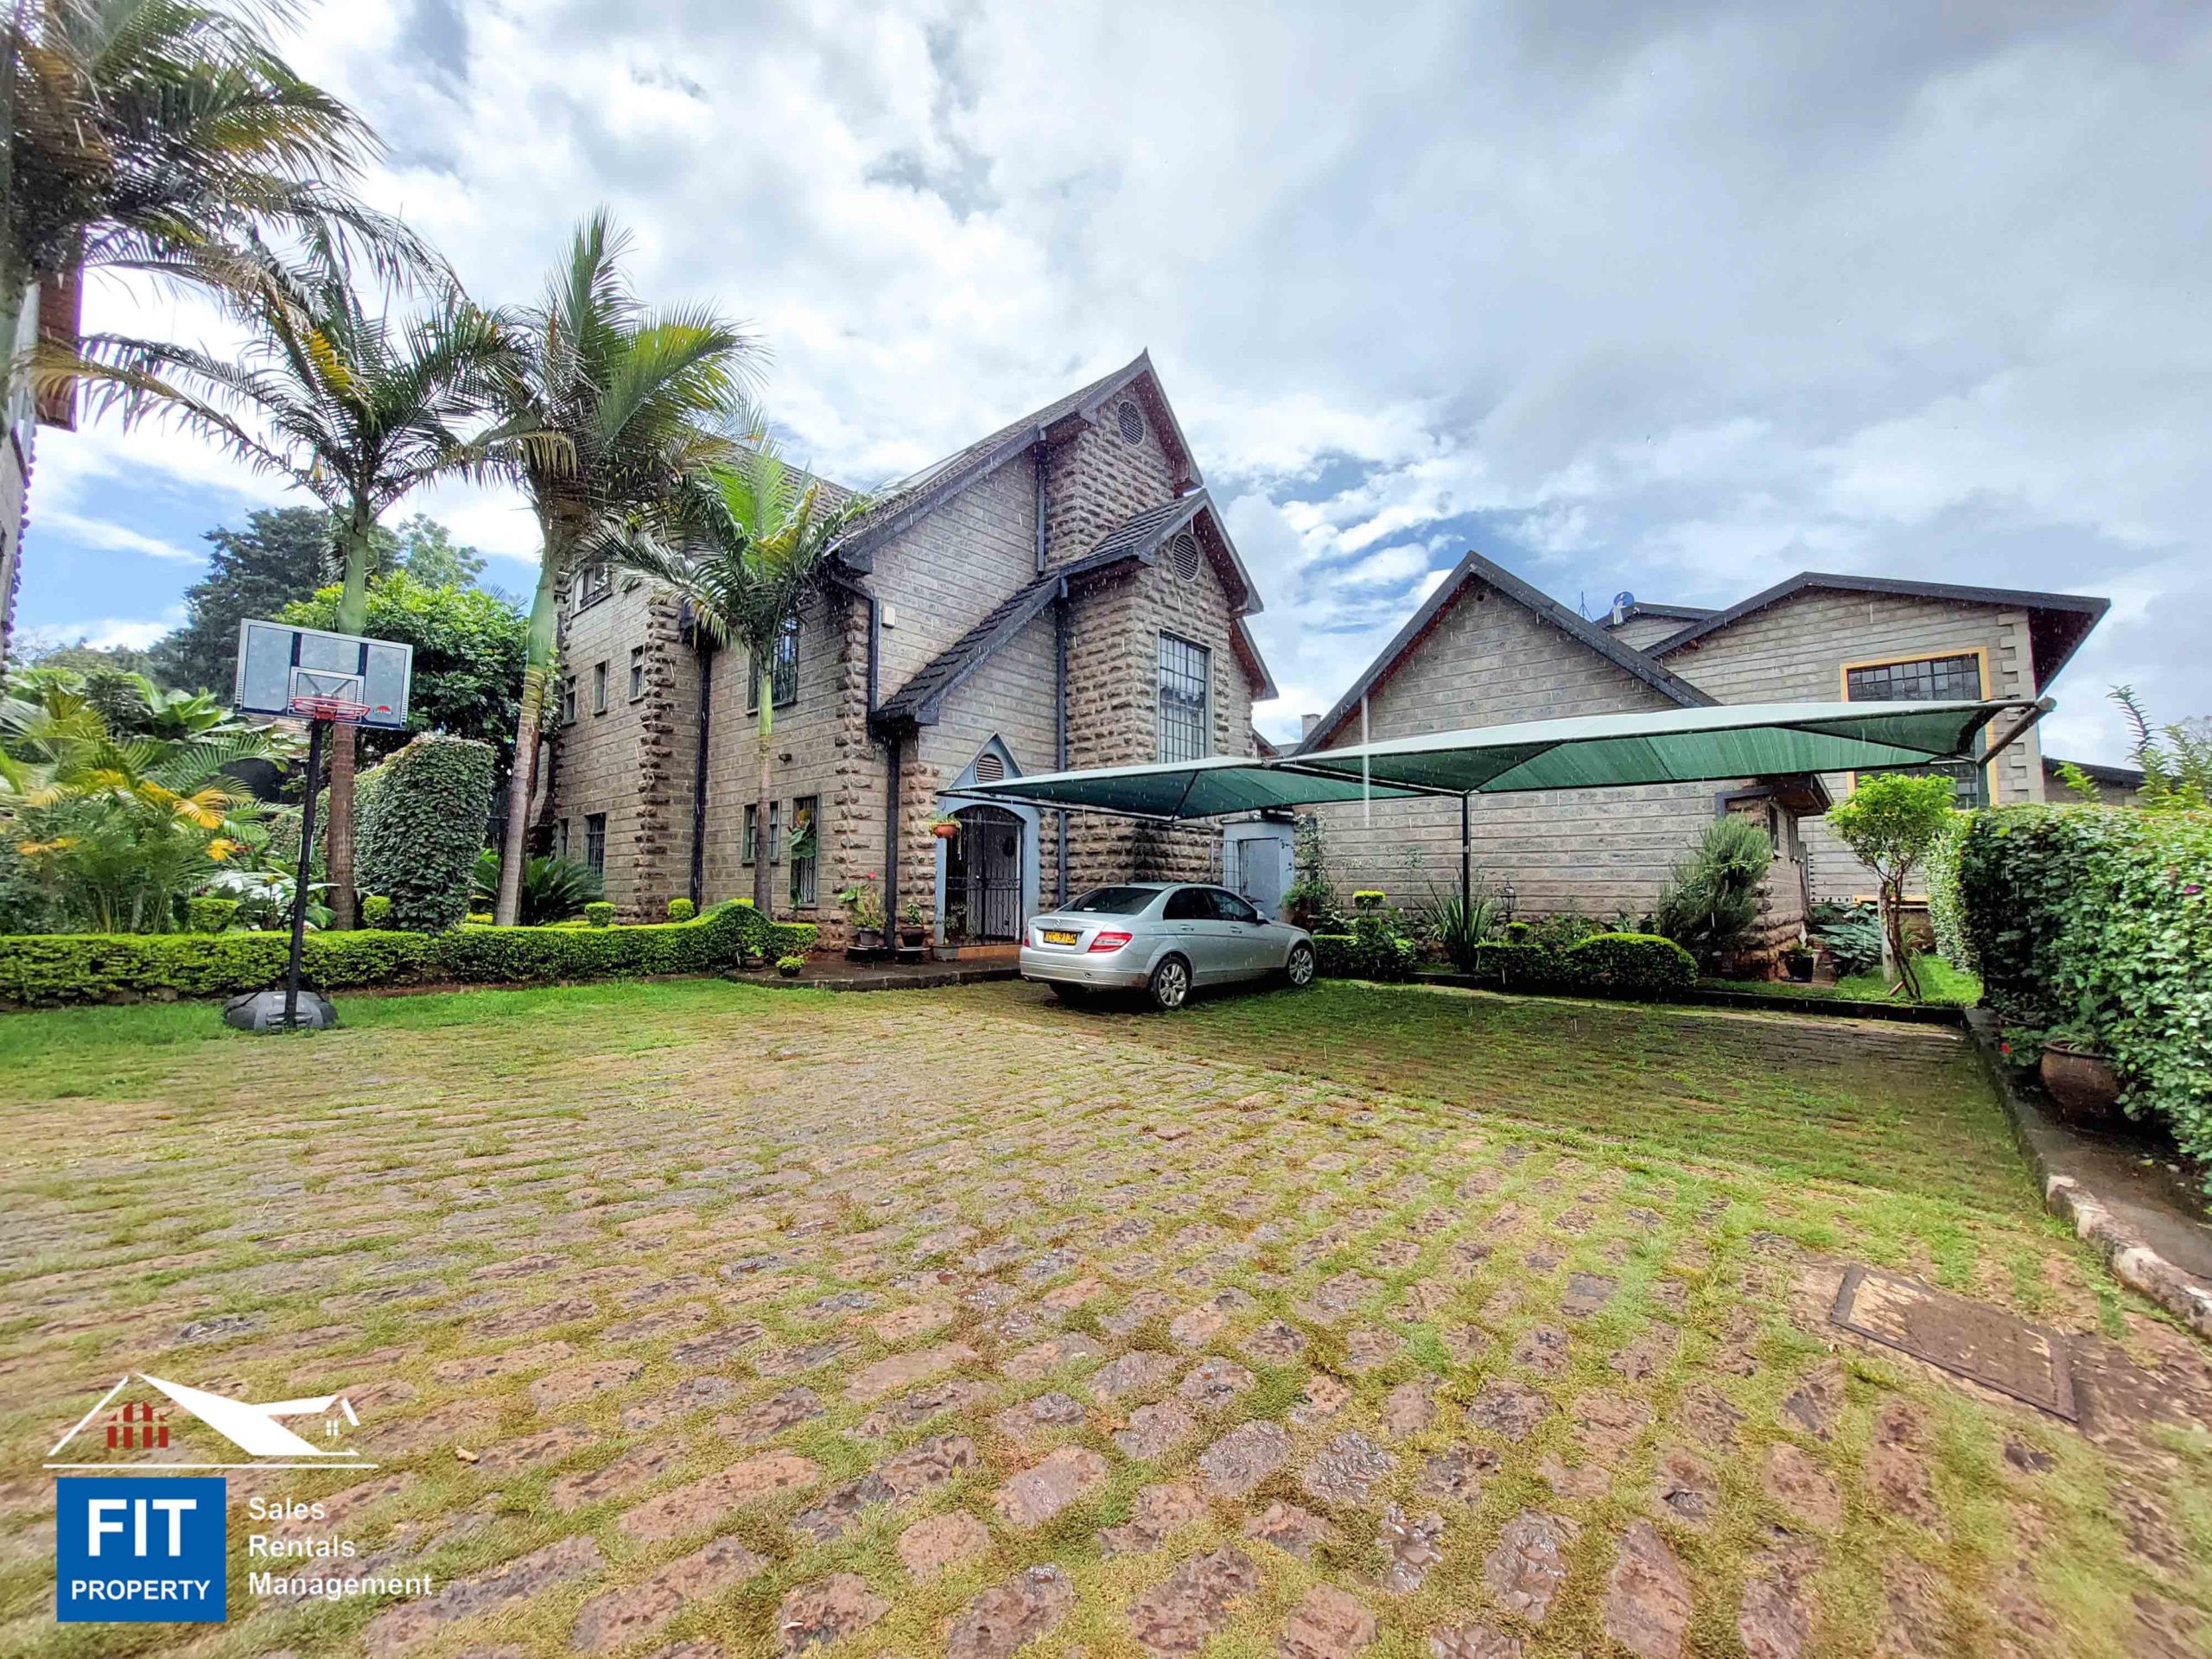 Elegant Stone Townhouse in Mzima Springs, Lavington, Nairobi. Has Architectural details, such as attic ceilings with wooden trusses. Price: KES 90M